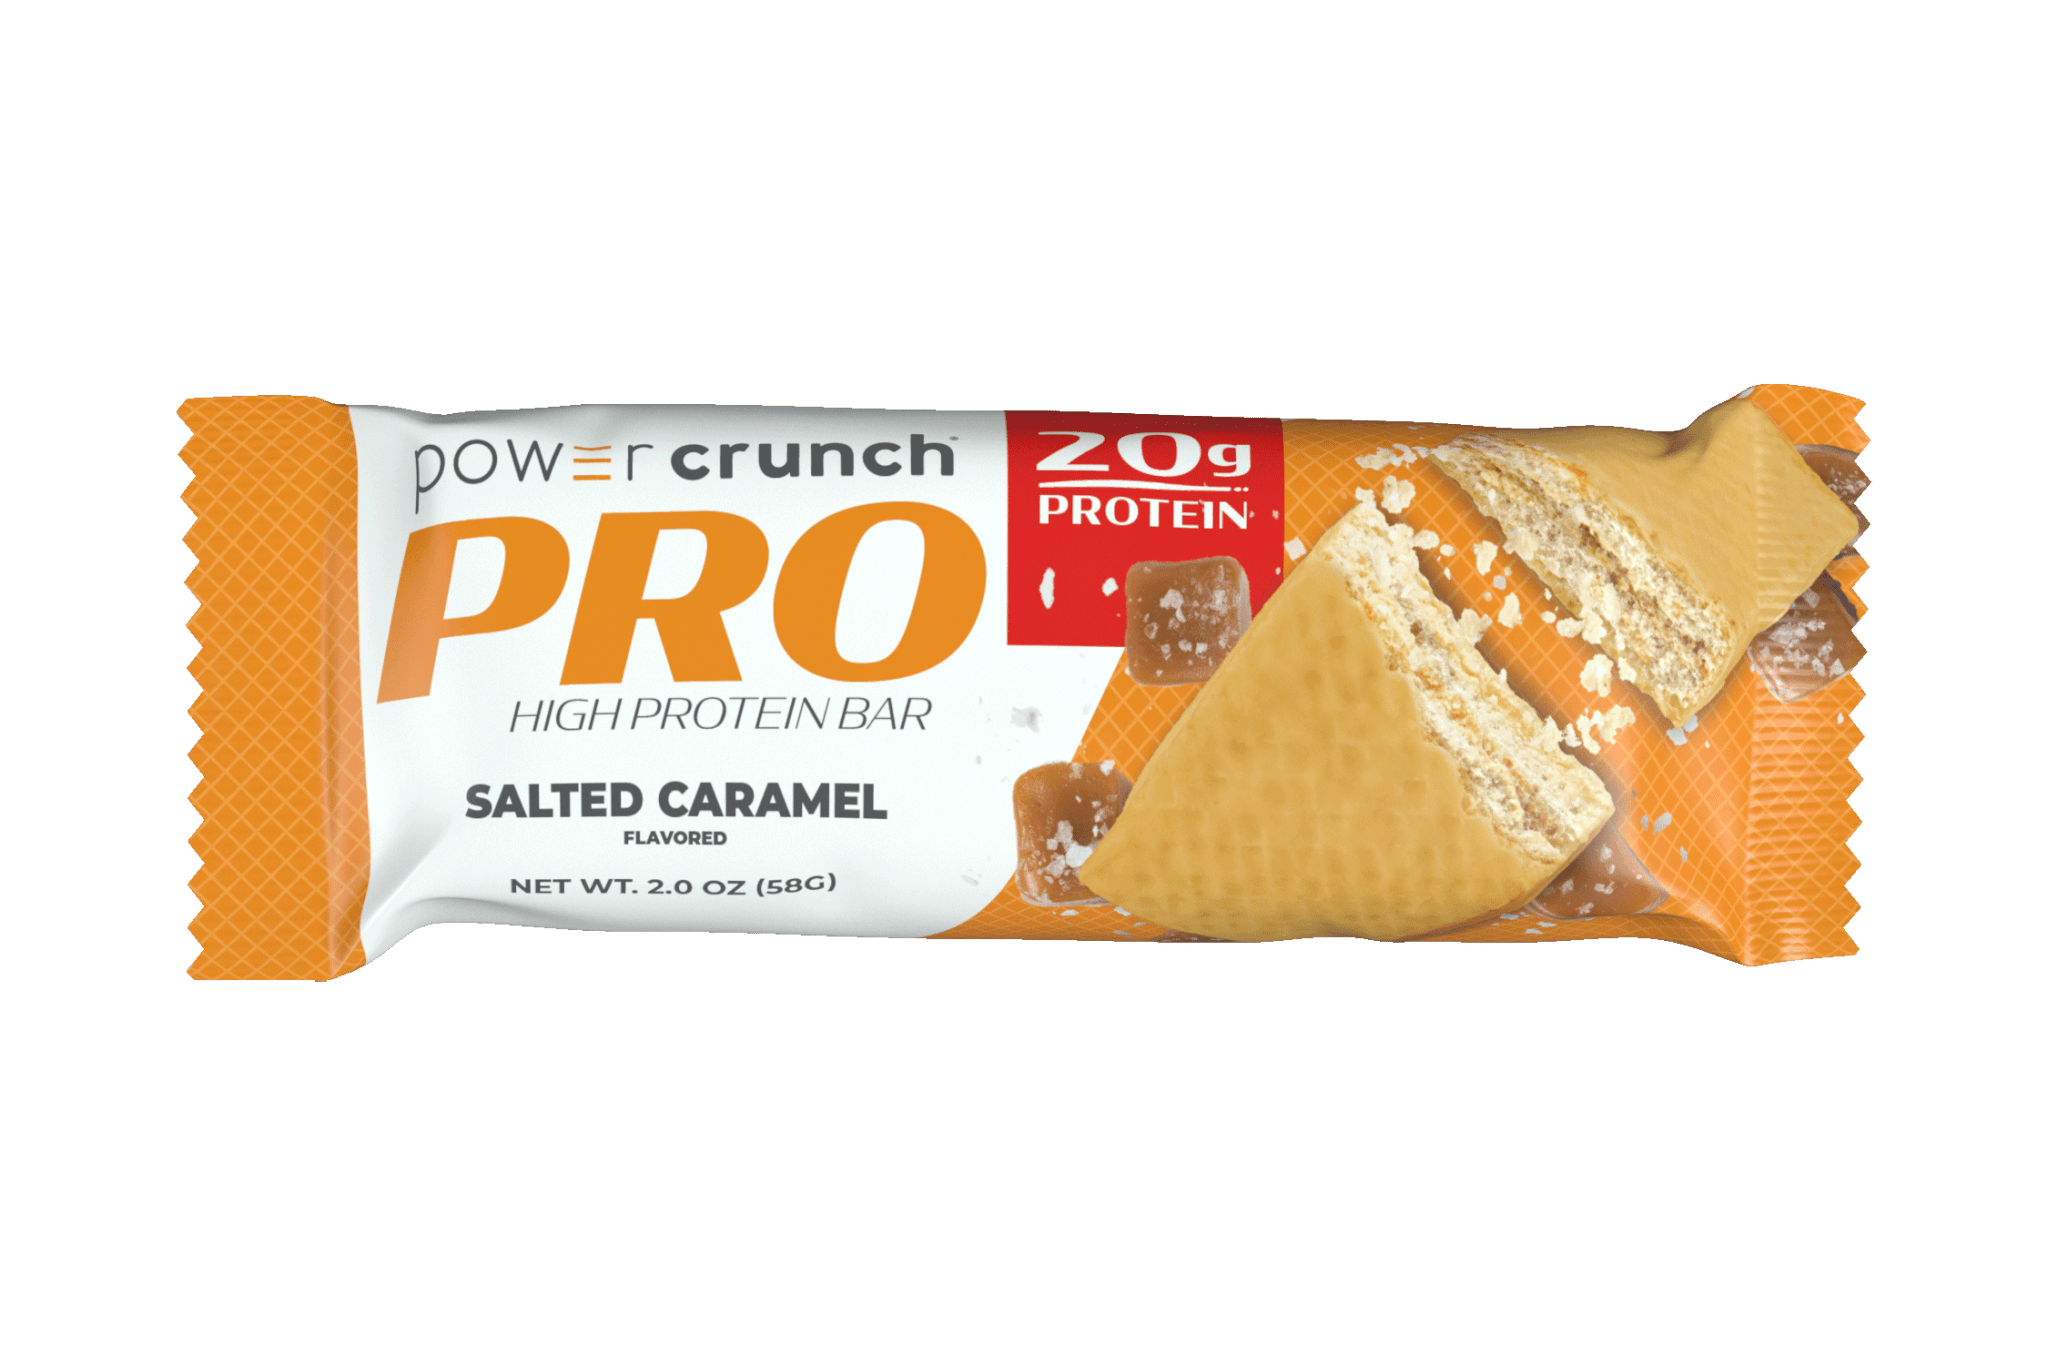 Power Crunch Salted Caramel PRO 20g protein bars